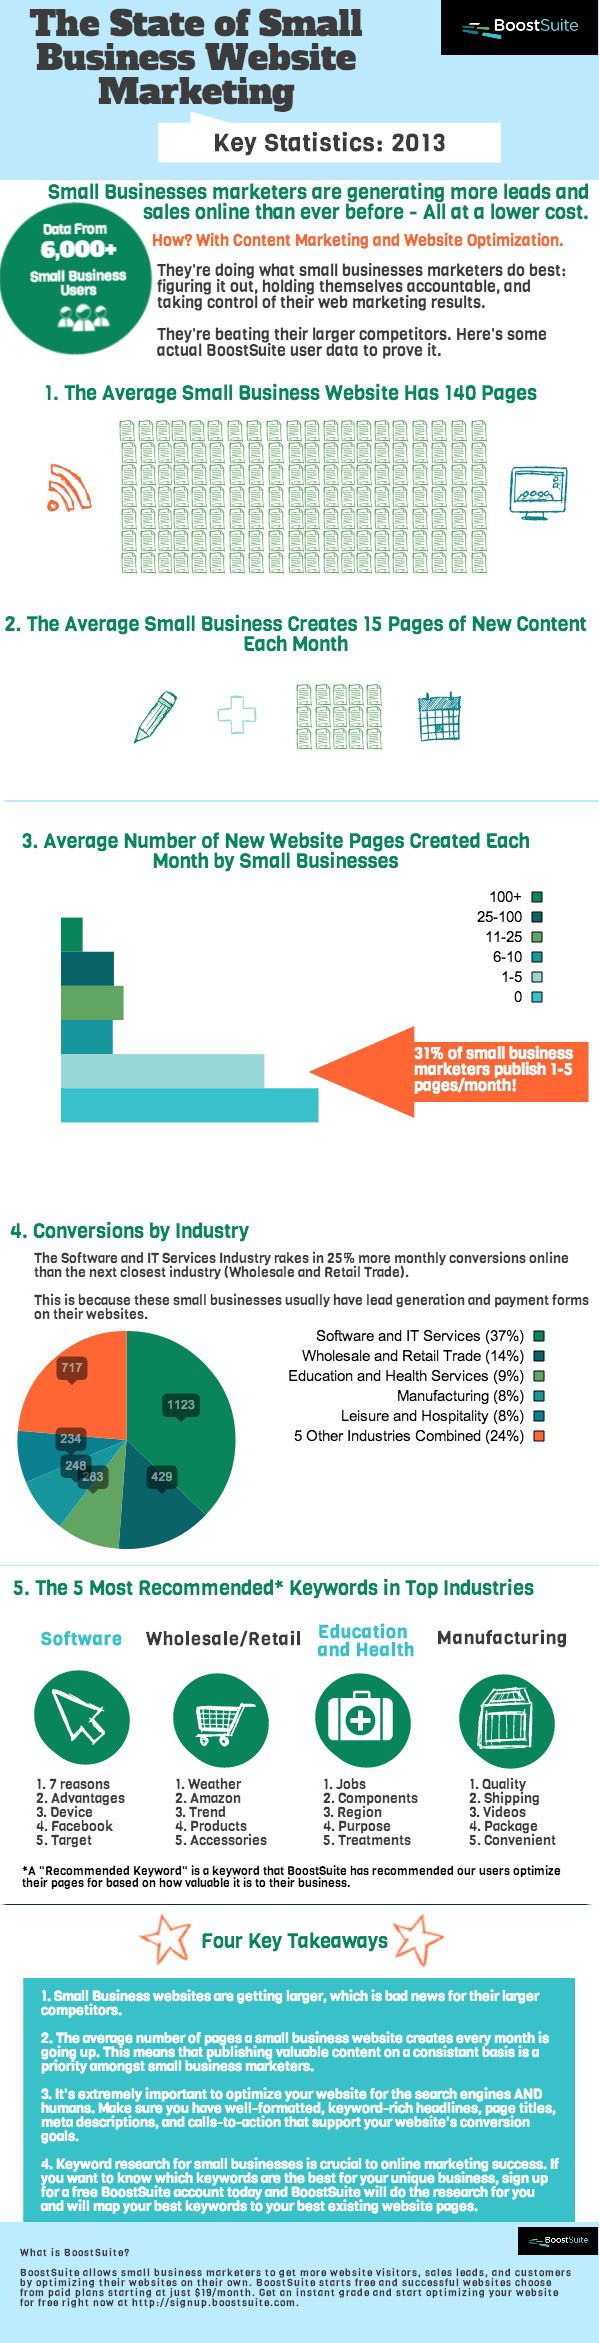 The State of Small Business Website Marketing – Infographic 1